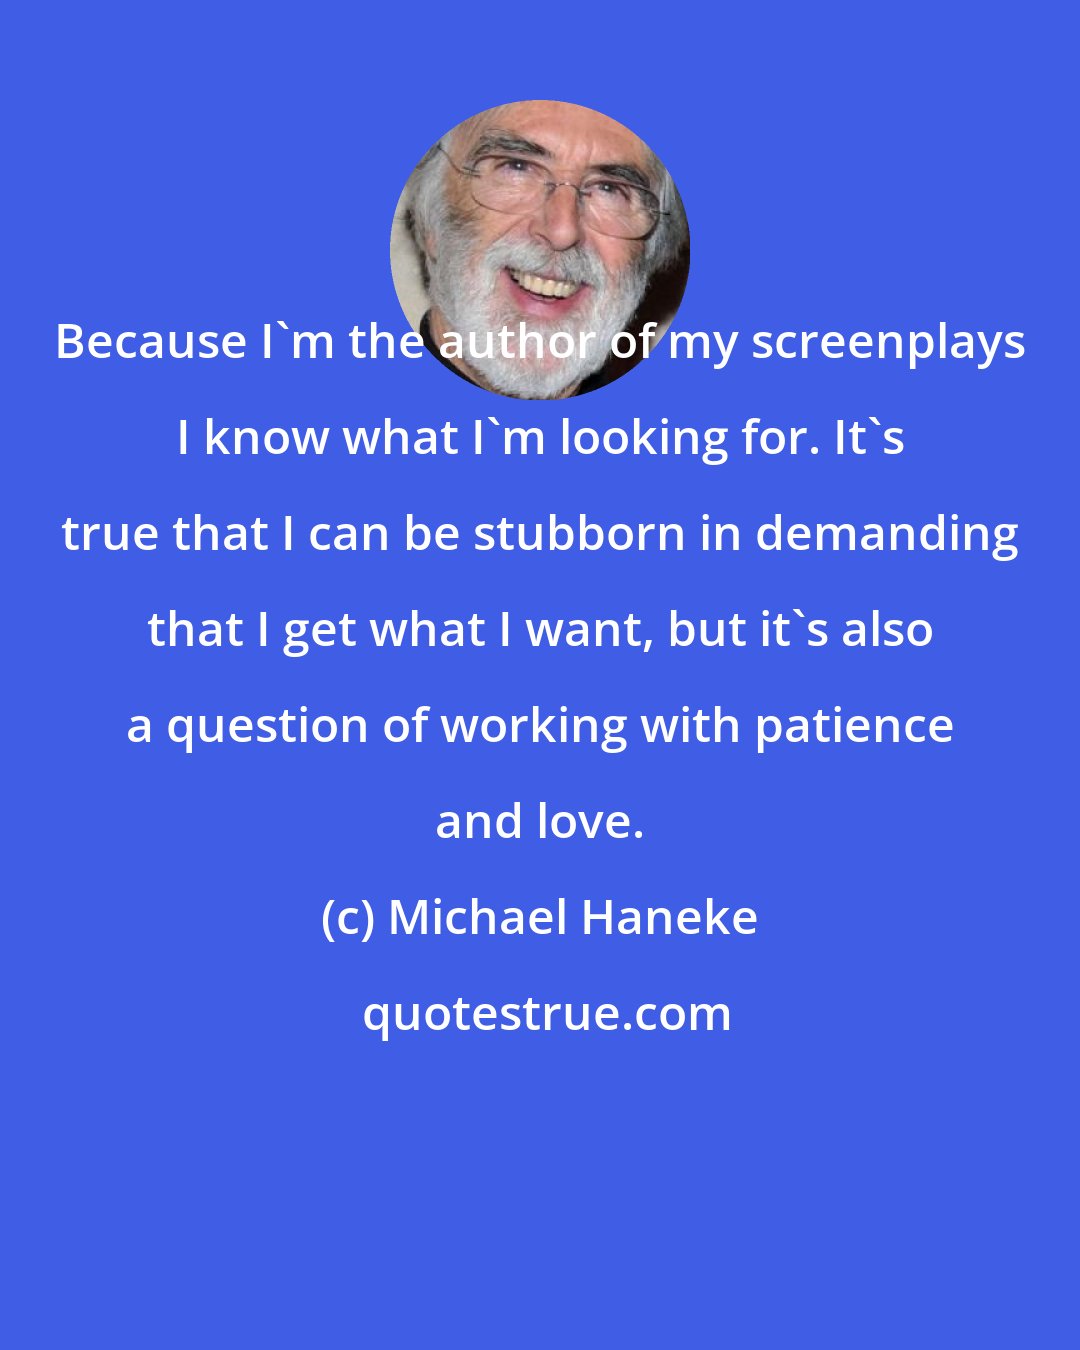 Michael Haneke: Because I'm the author of my screenplays I know what I'm looking for. It's true that I can be stubborn in demanding that I get what I want, but it's also a question of working with patience and love.